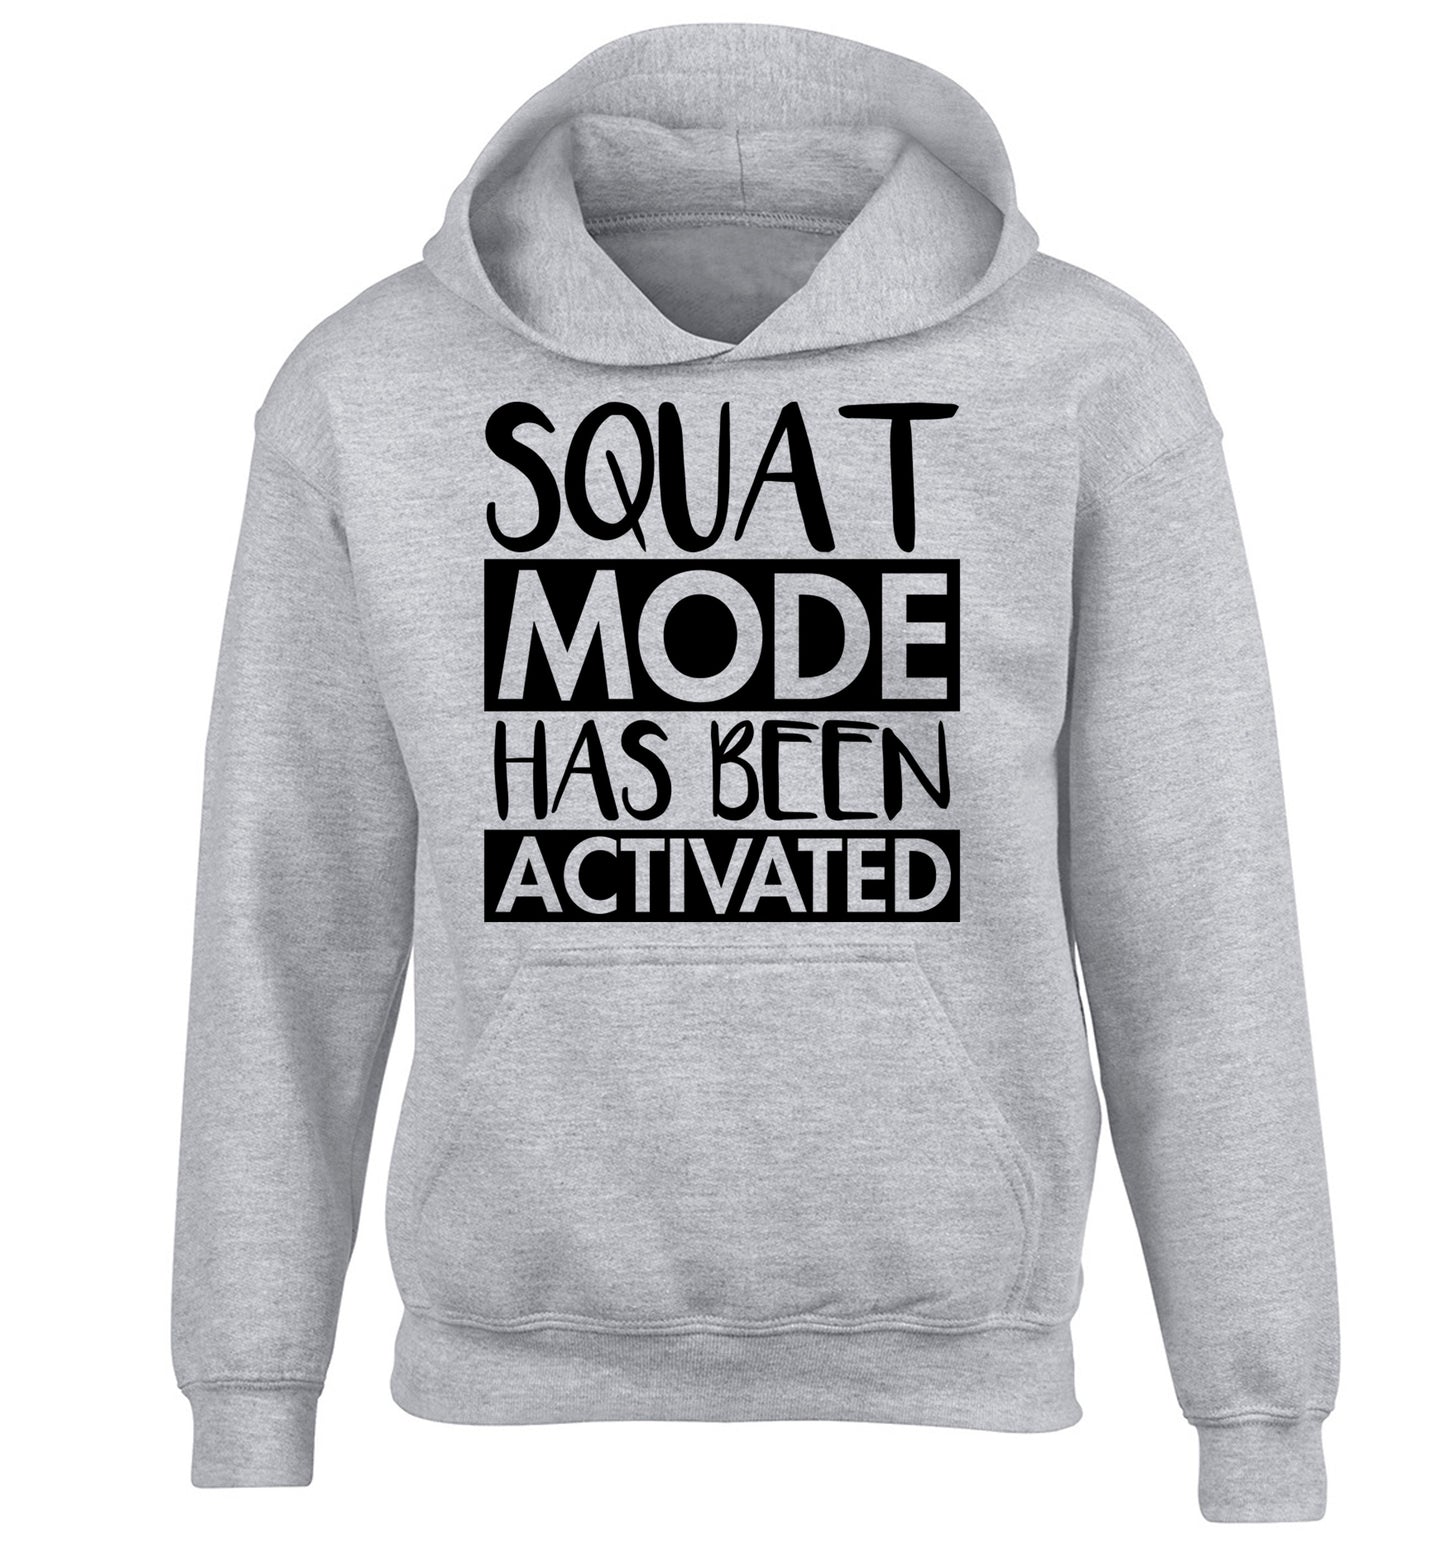 Squat mode activated children's grey hoodie 12-14 Years